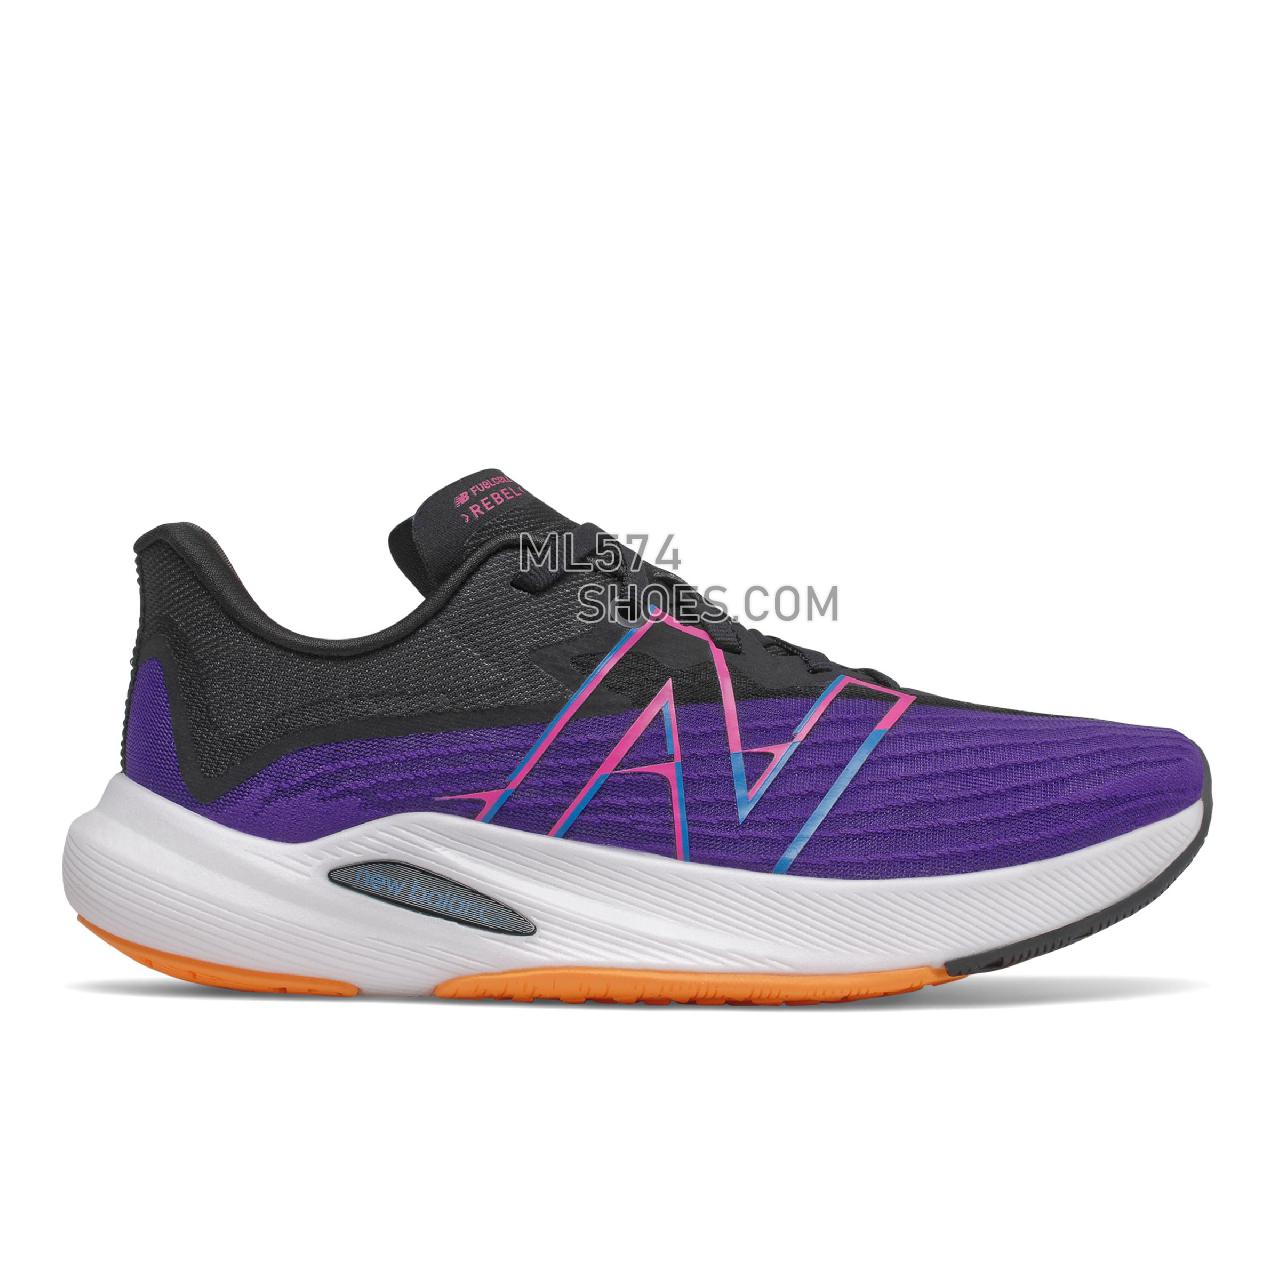 New Balance FuelCell Rebel v2 - Women's Neutral Running - Deep Violet with Black - WFCXCV2